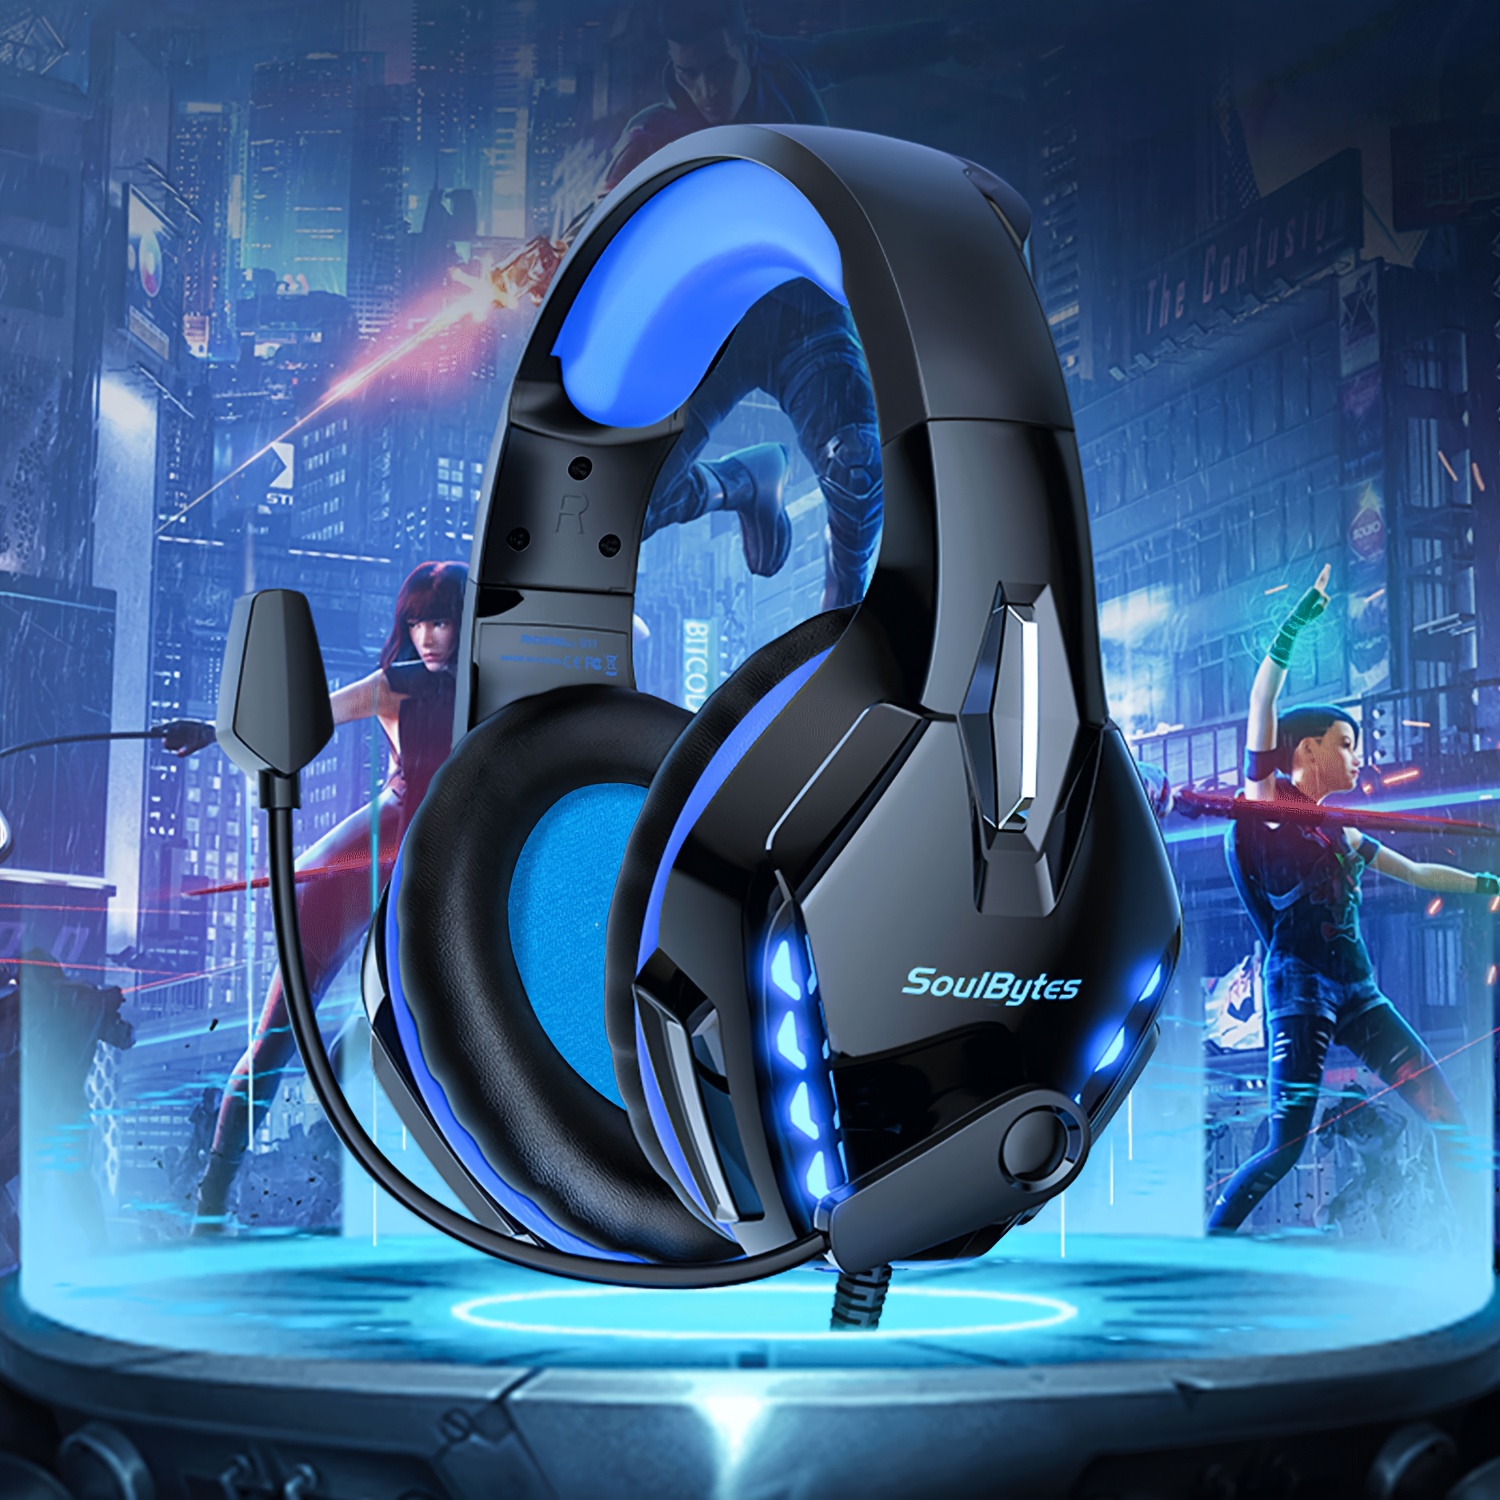 Gaming Headset for PS5 PS4 PC, Gaming Headphones with Noise Cancelling Mic,  Wired Gamer Headsets for Computer Laptop Mac Nintendo NES Games